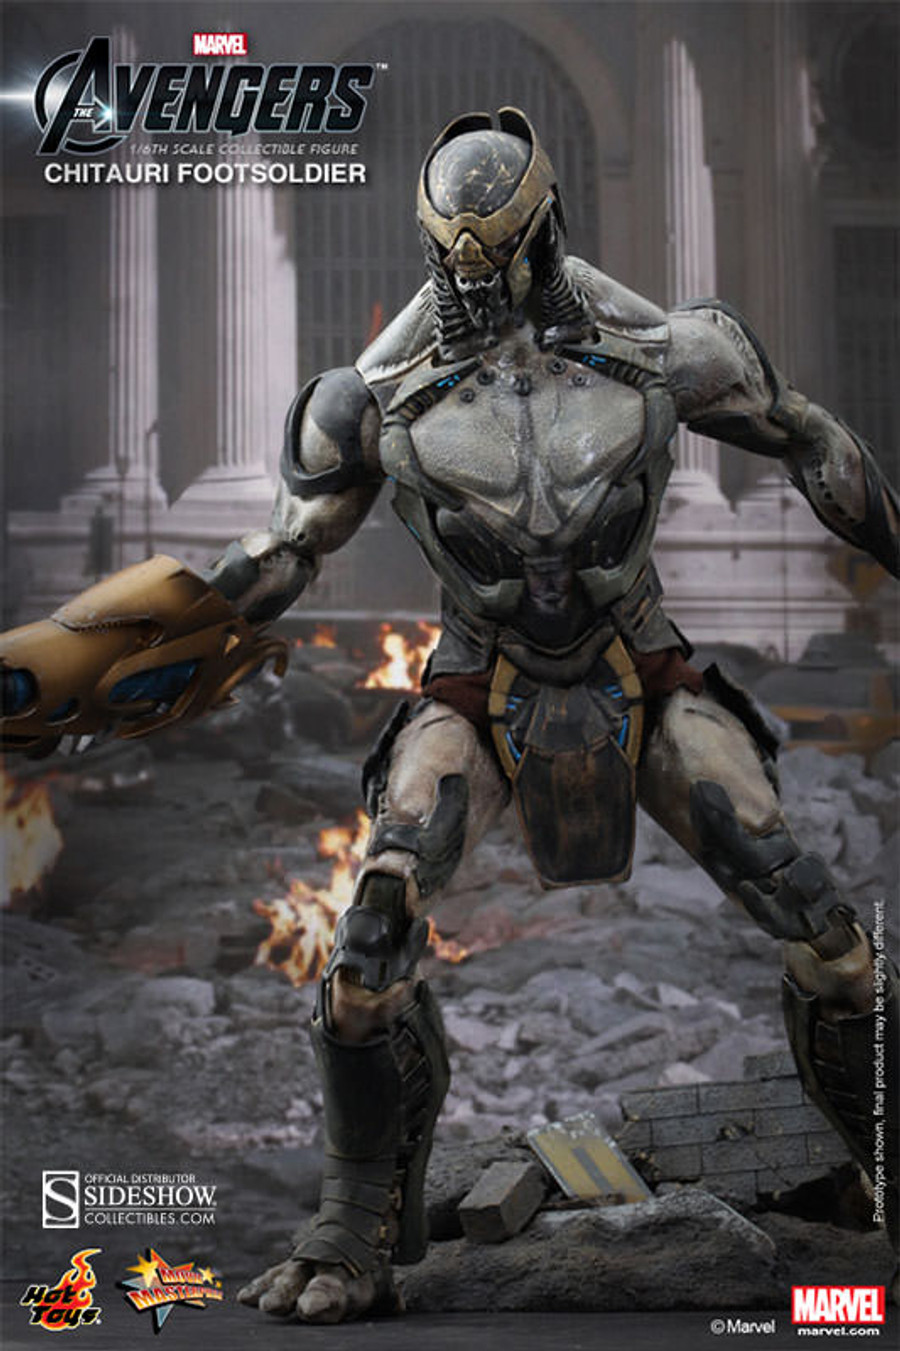 Hot Toys - The Avengers - Chitauri Footsoldier